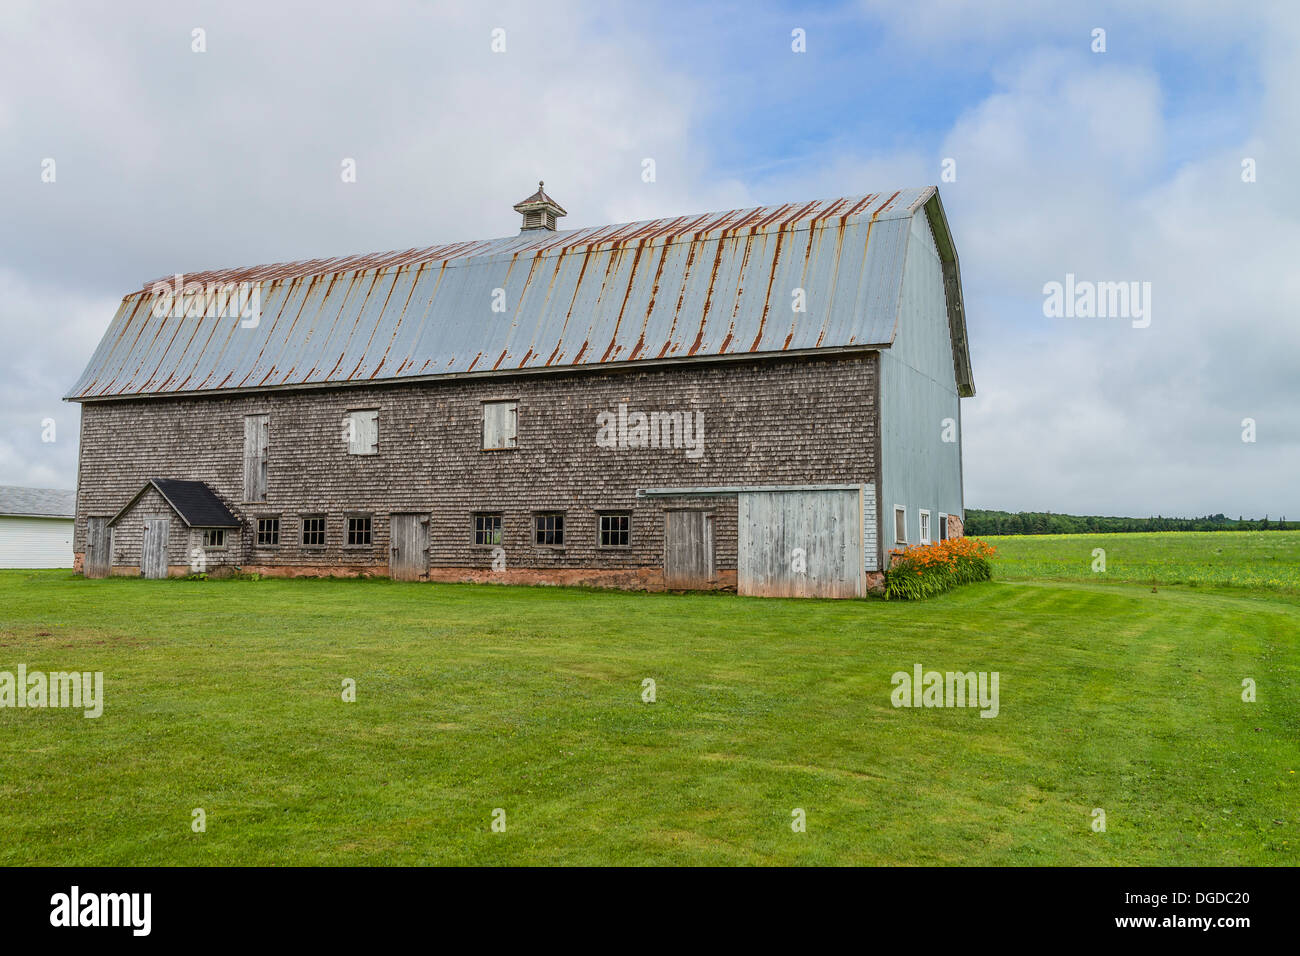 Old weathered shake shingle sided barn with rusted metal roof Prince Edward Island, one of the Maritime Provinces in Canada. Stock Photo